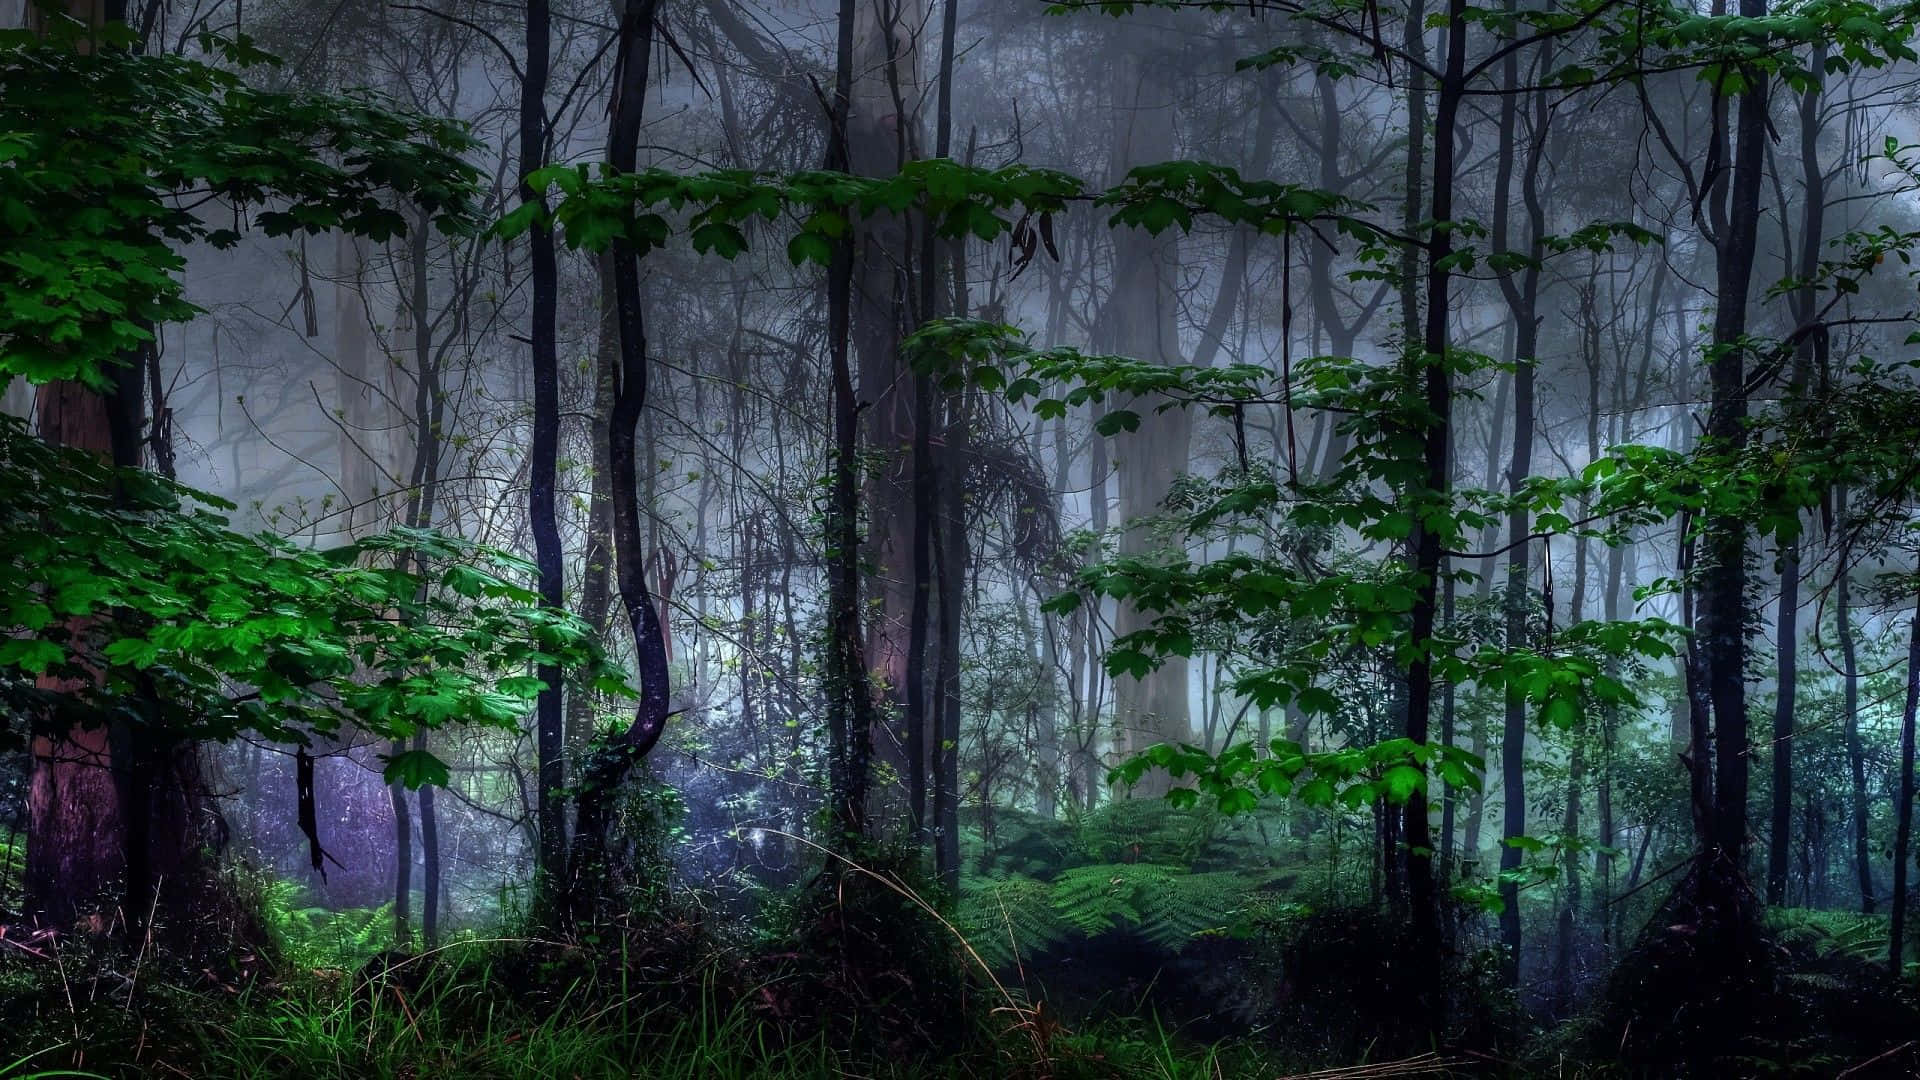 An eerie look into the dark forest